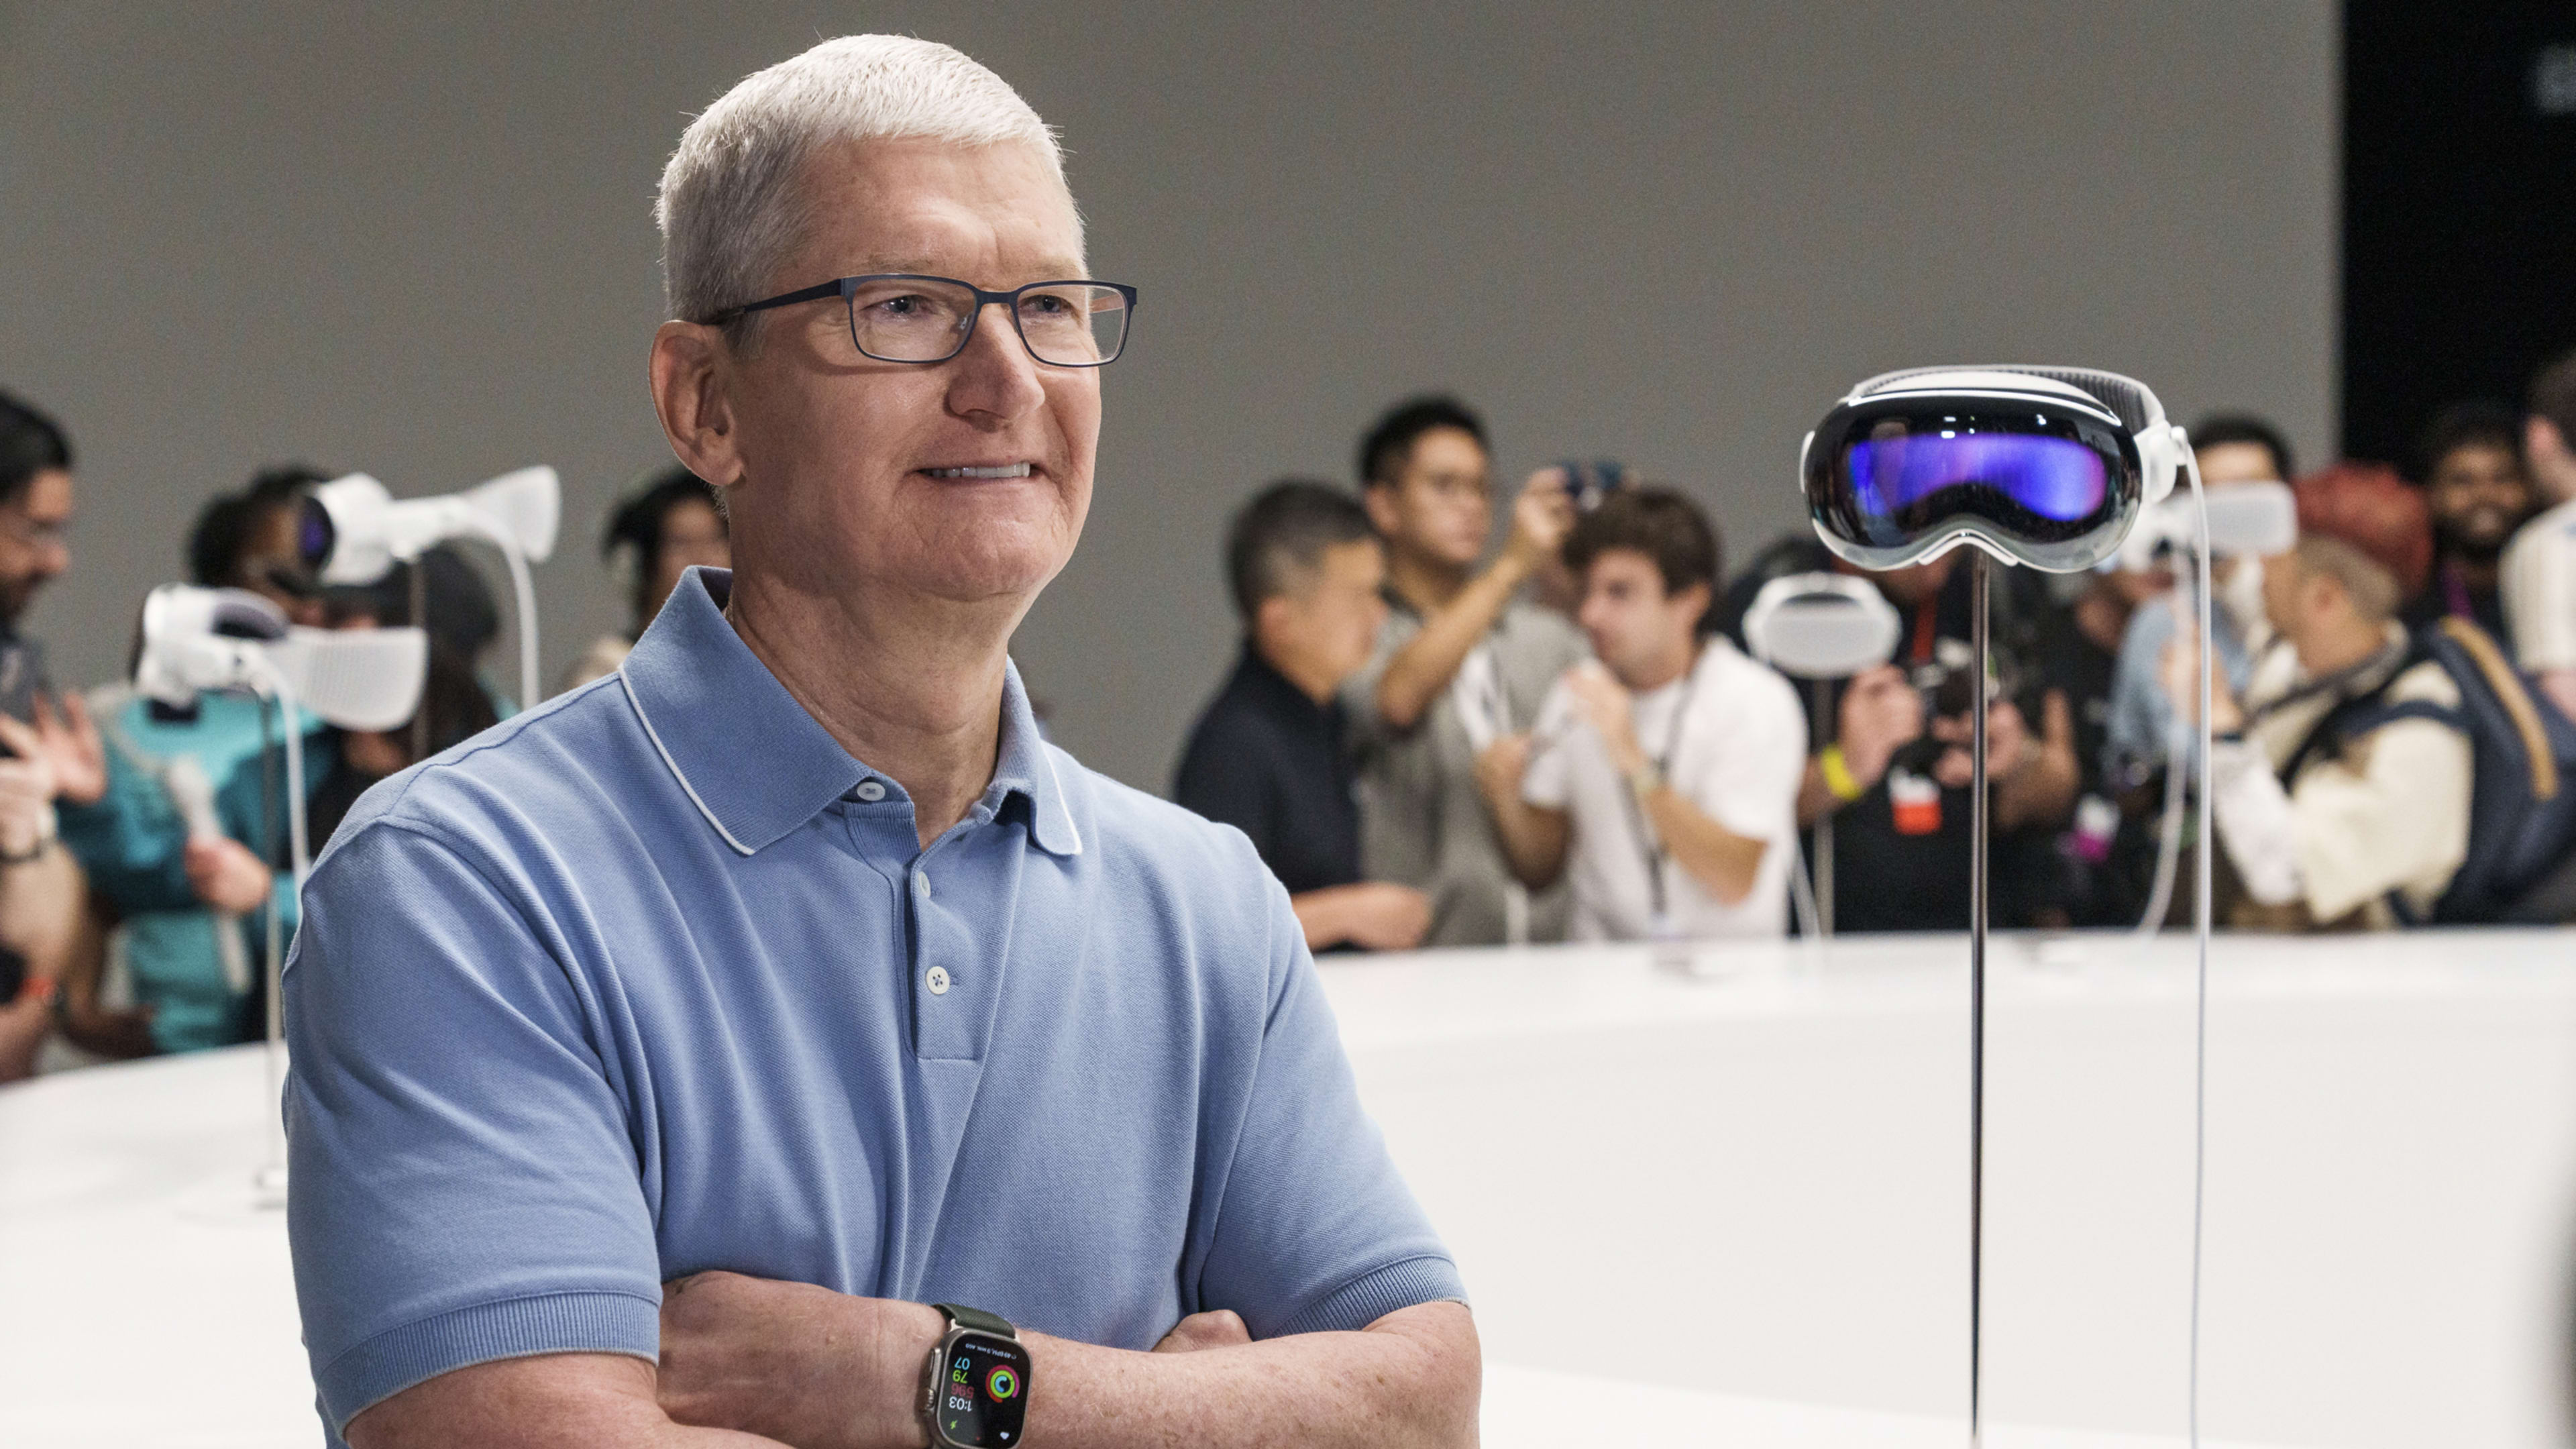 With the Vision Pro, Apple has never depended more on developers for a product’s success